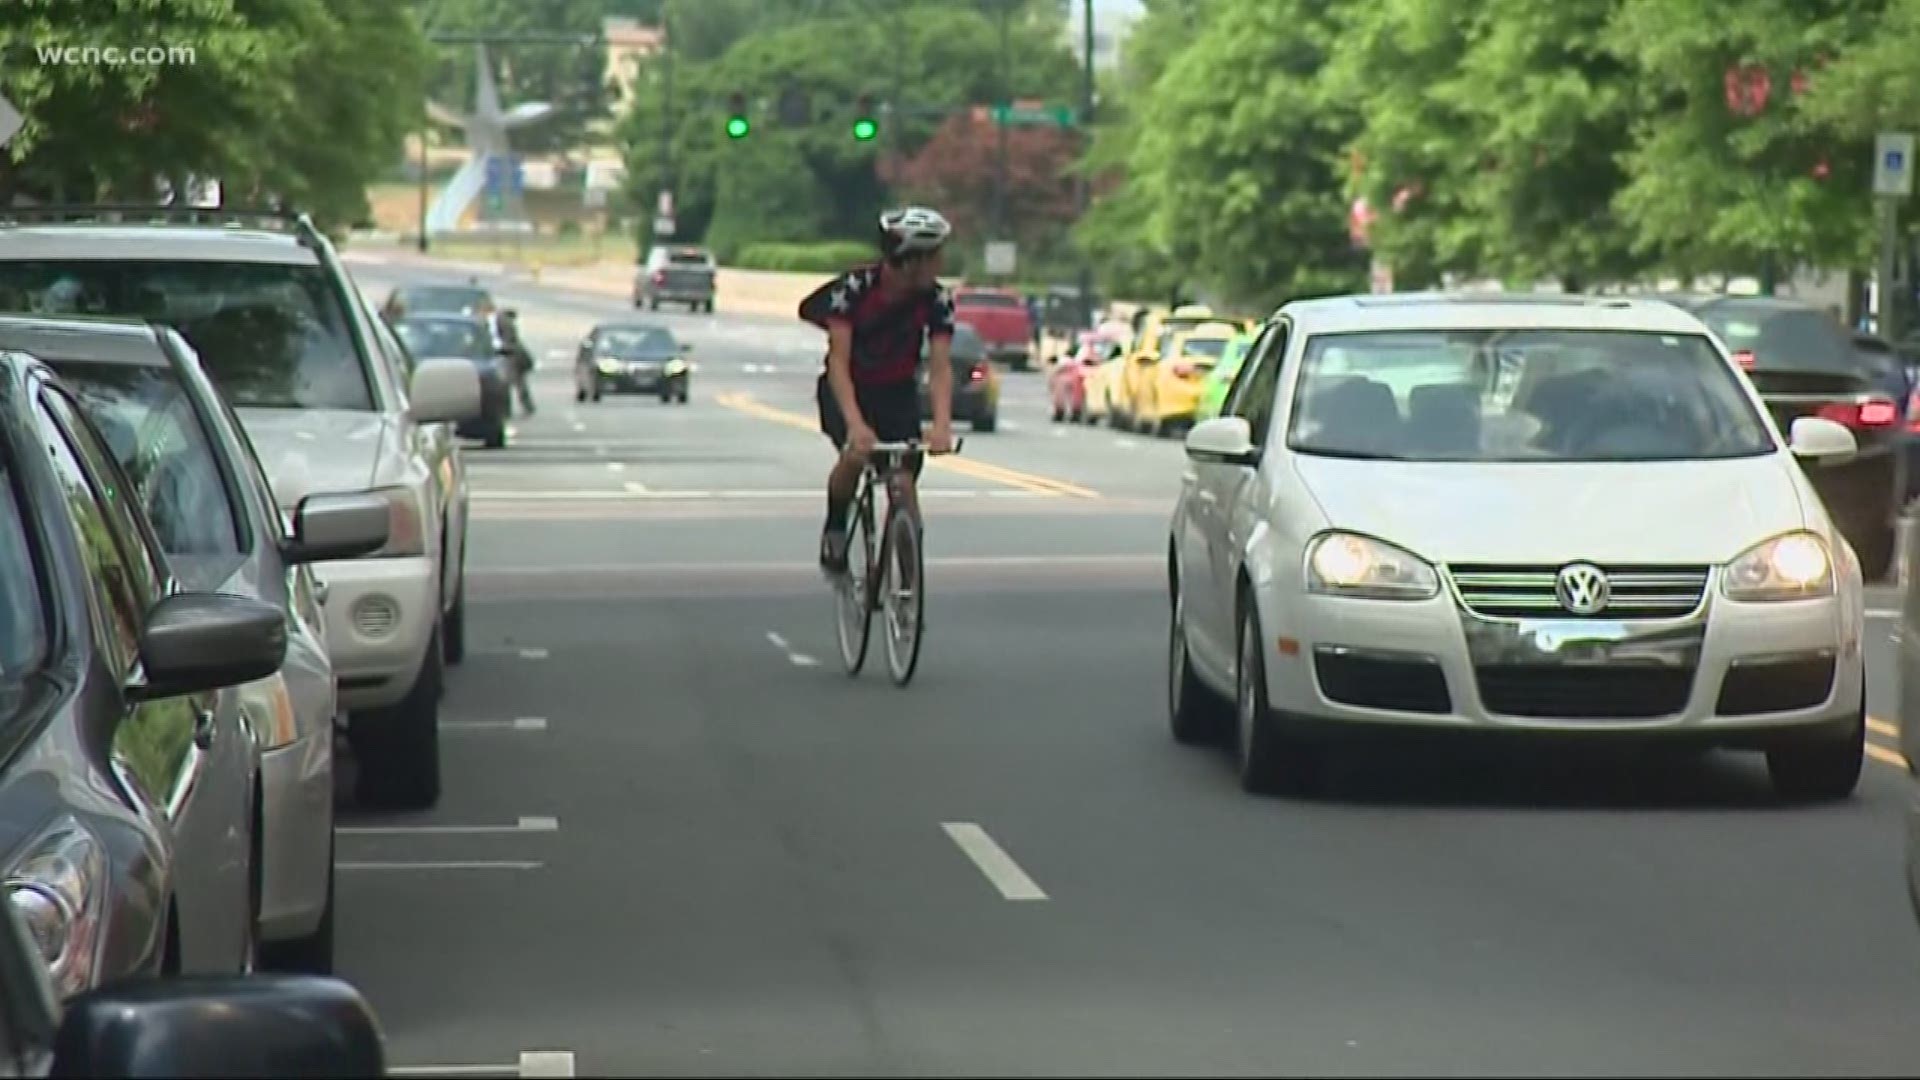 City leaders are proposing adding bike lanes to uptown streets in an effort to curb crashes involving cyclists.